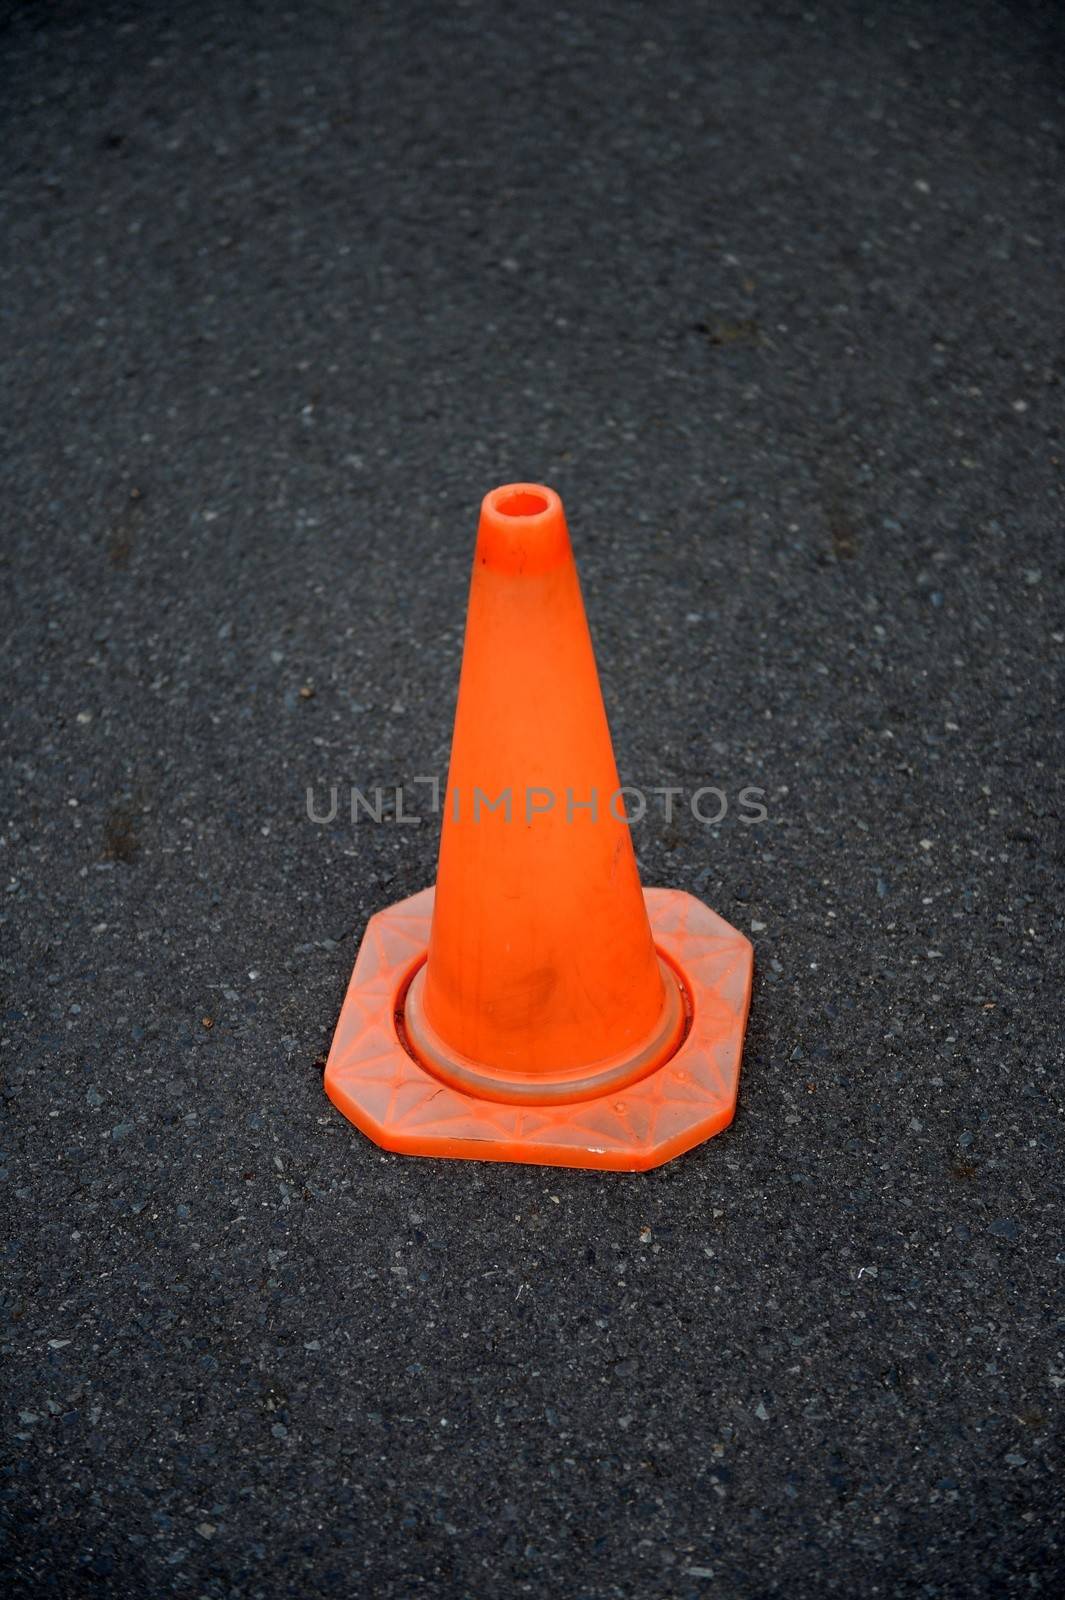 A close up shot of a safety cone on a road